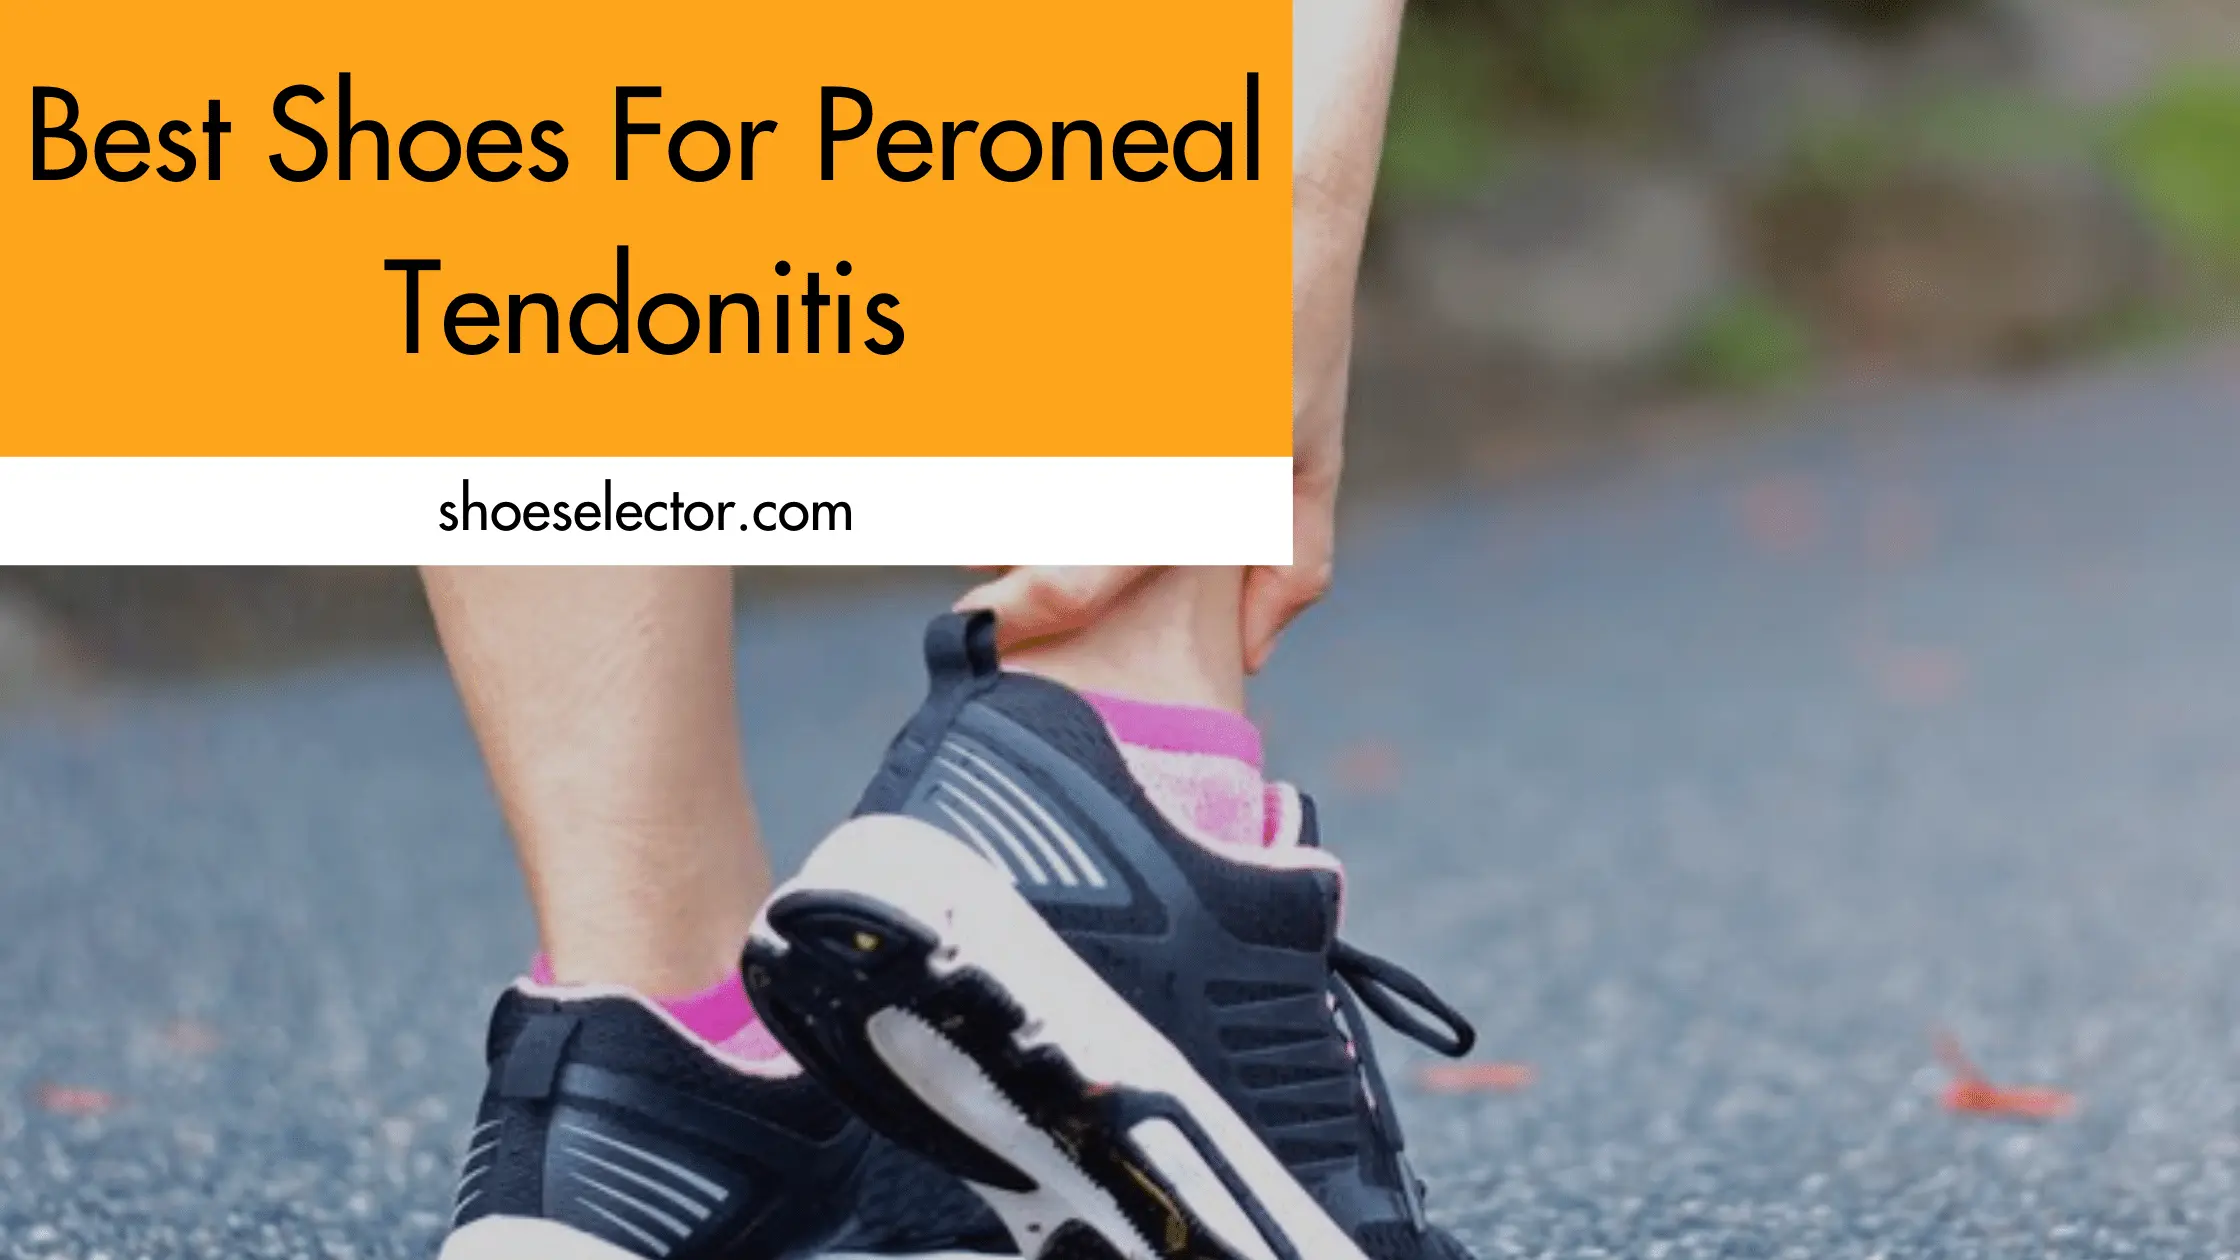 Best Shoes For Peroneal Tendonitis - Latest Guide